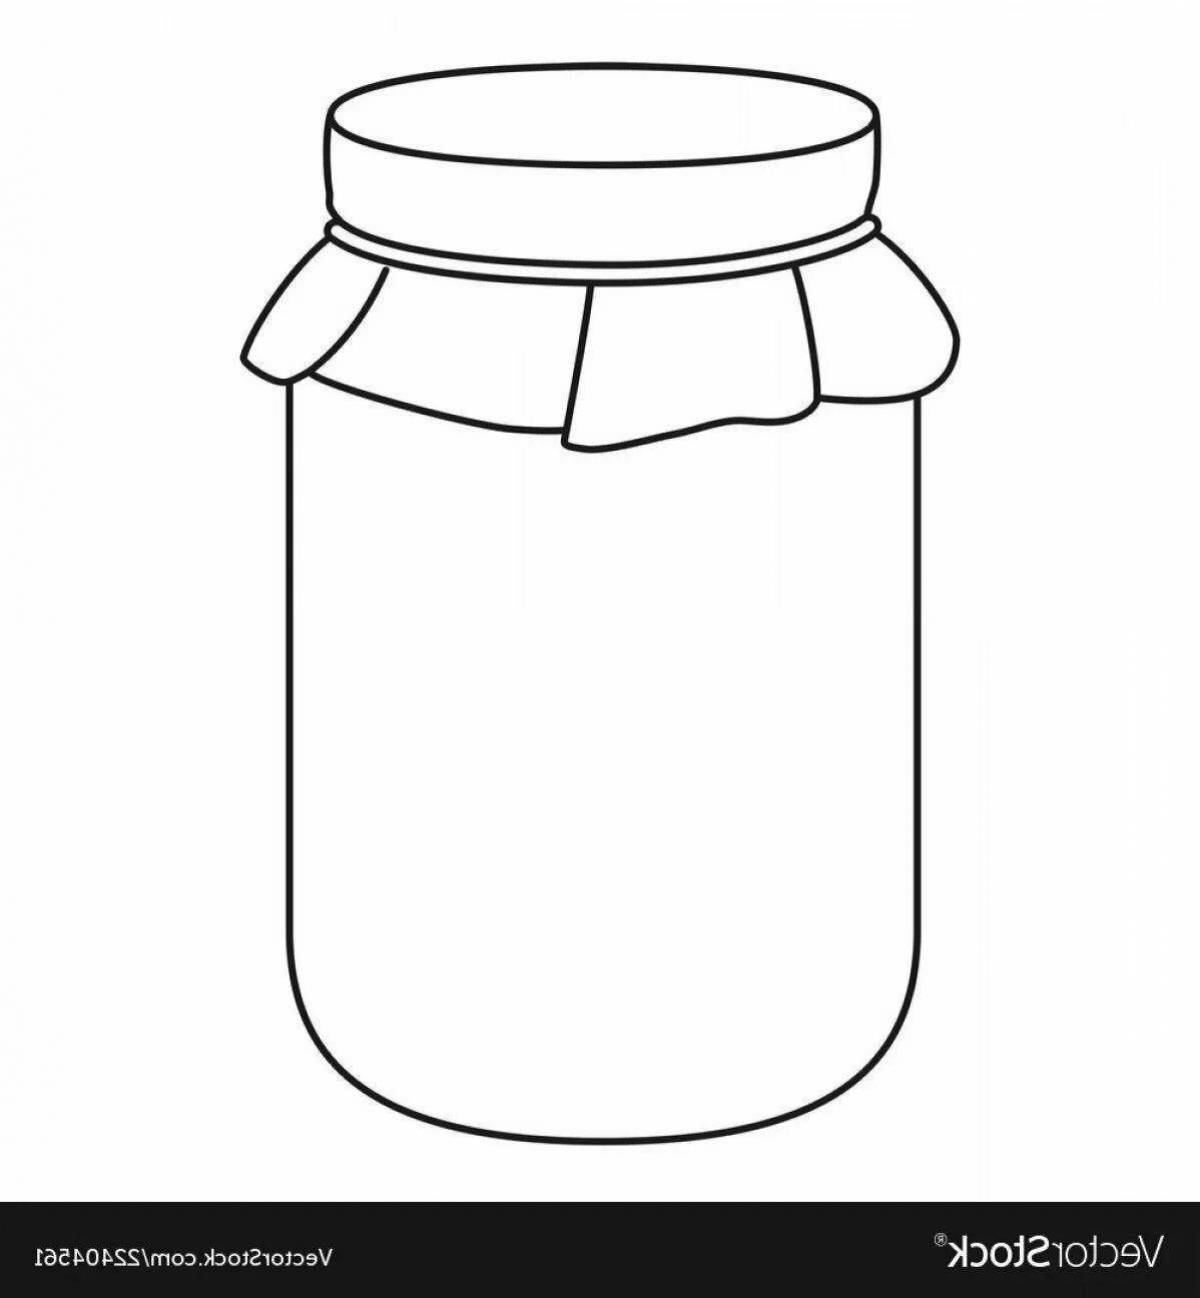 Gorgeous jar of vitamins coloring page